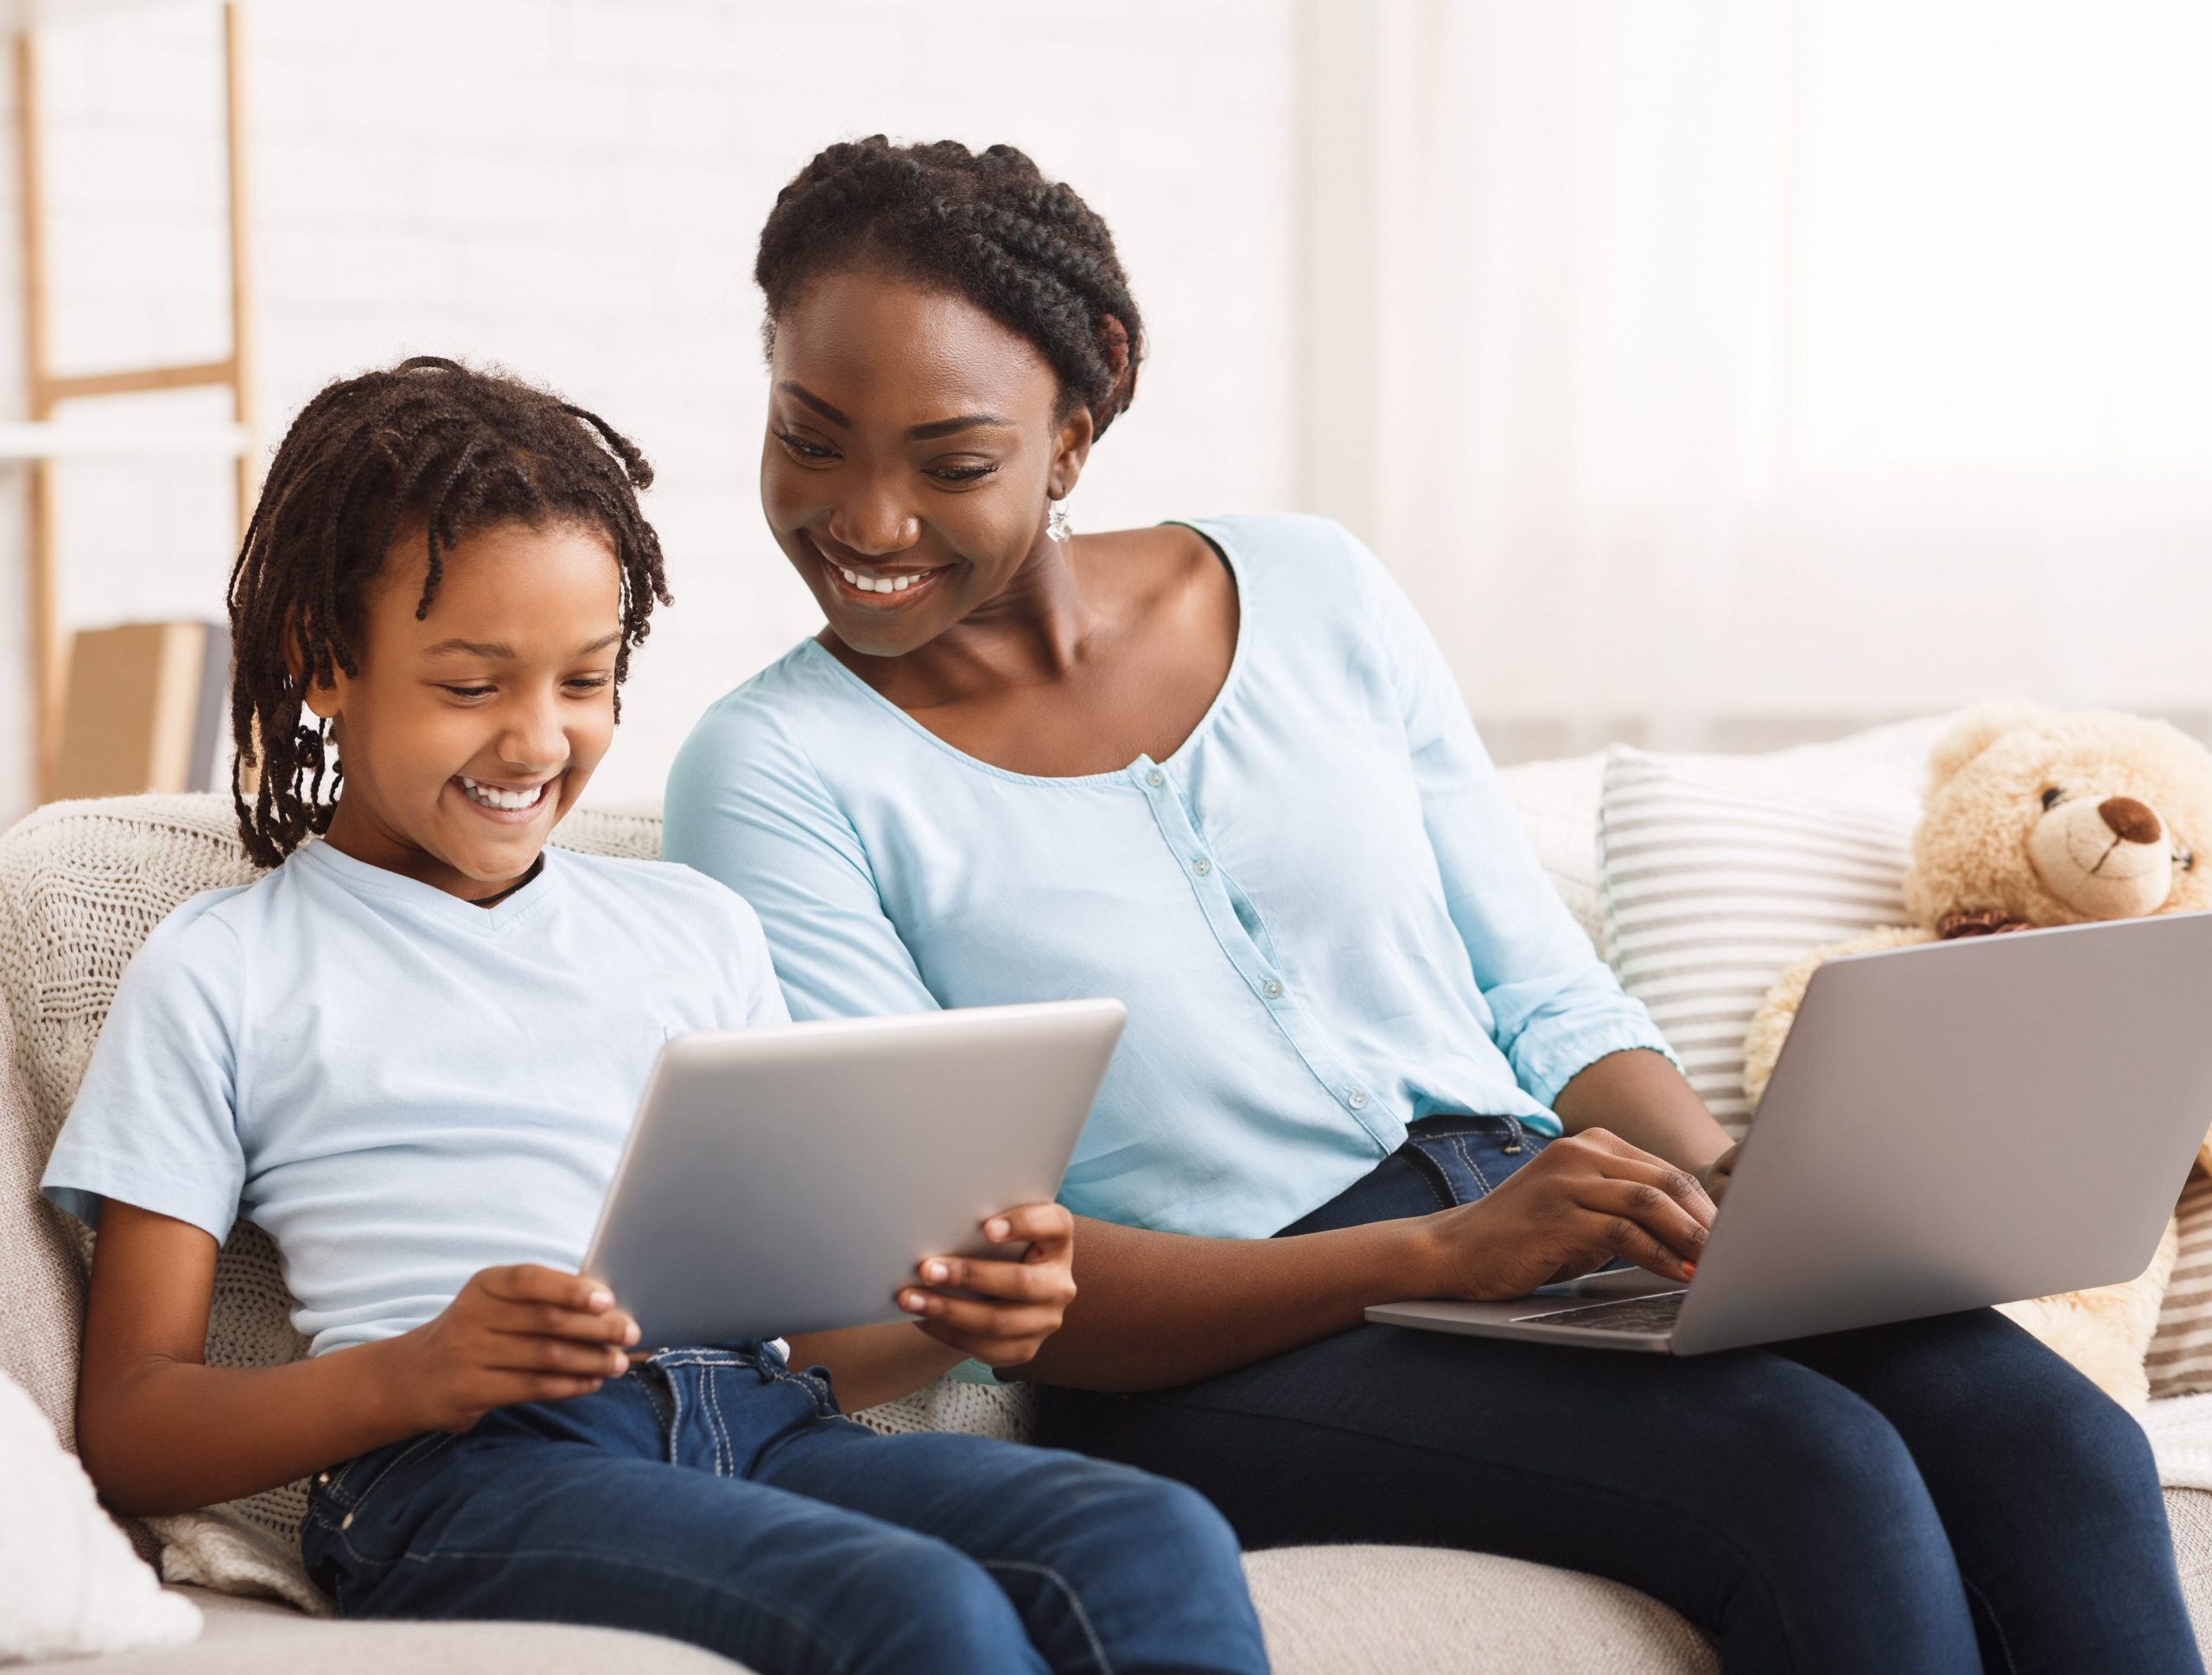 Mother and child enjoying screen time together. Mother is keeping kid safe online.